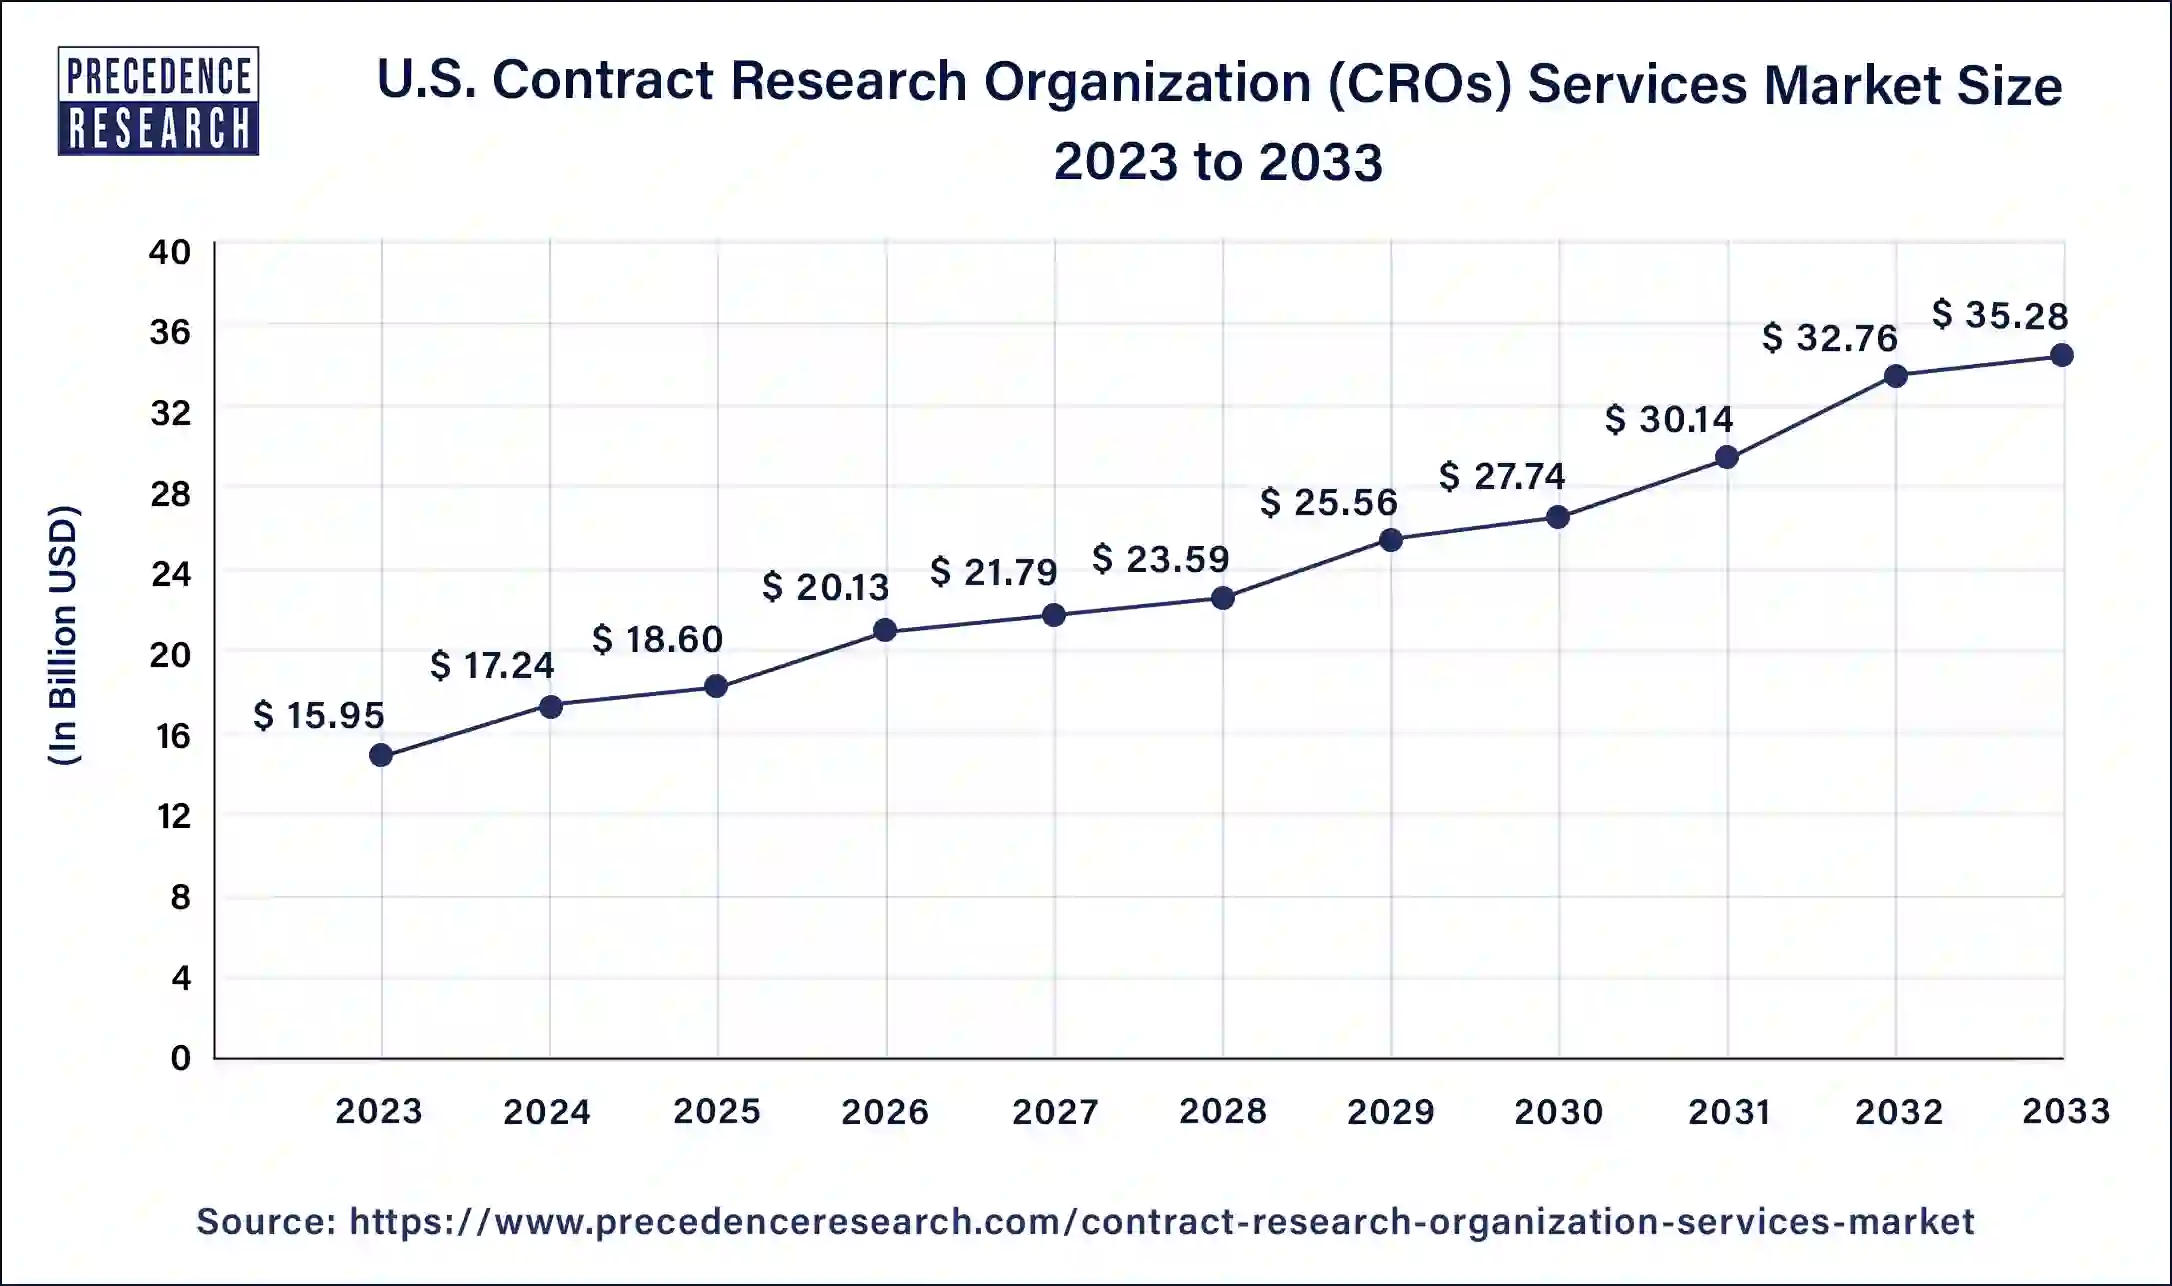 U.S. Contract Research Organization (CROs) Services Market Size 2024 to 2033